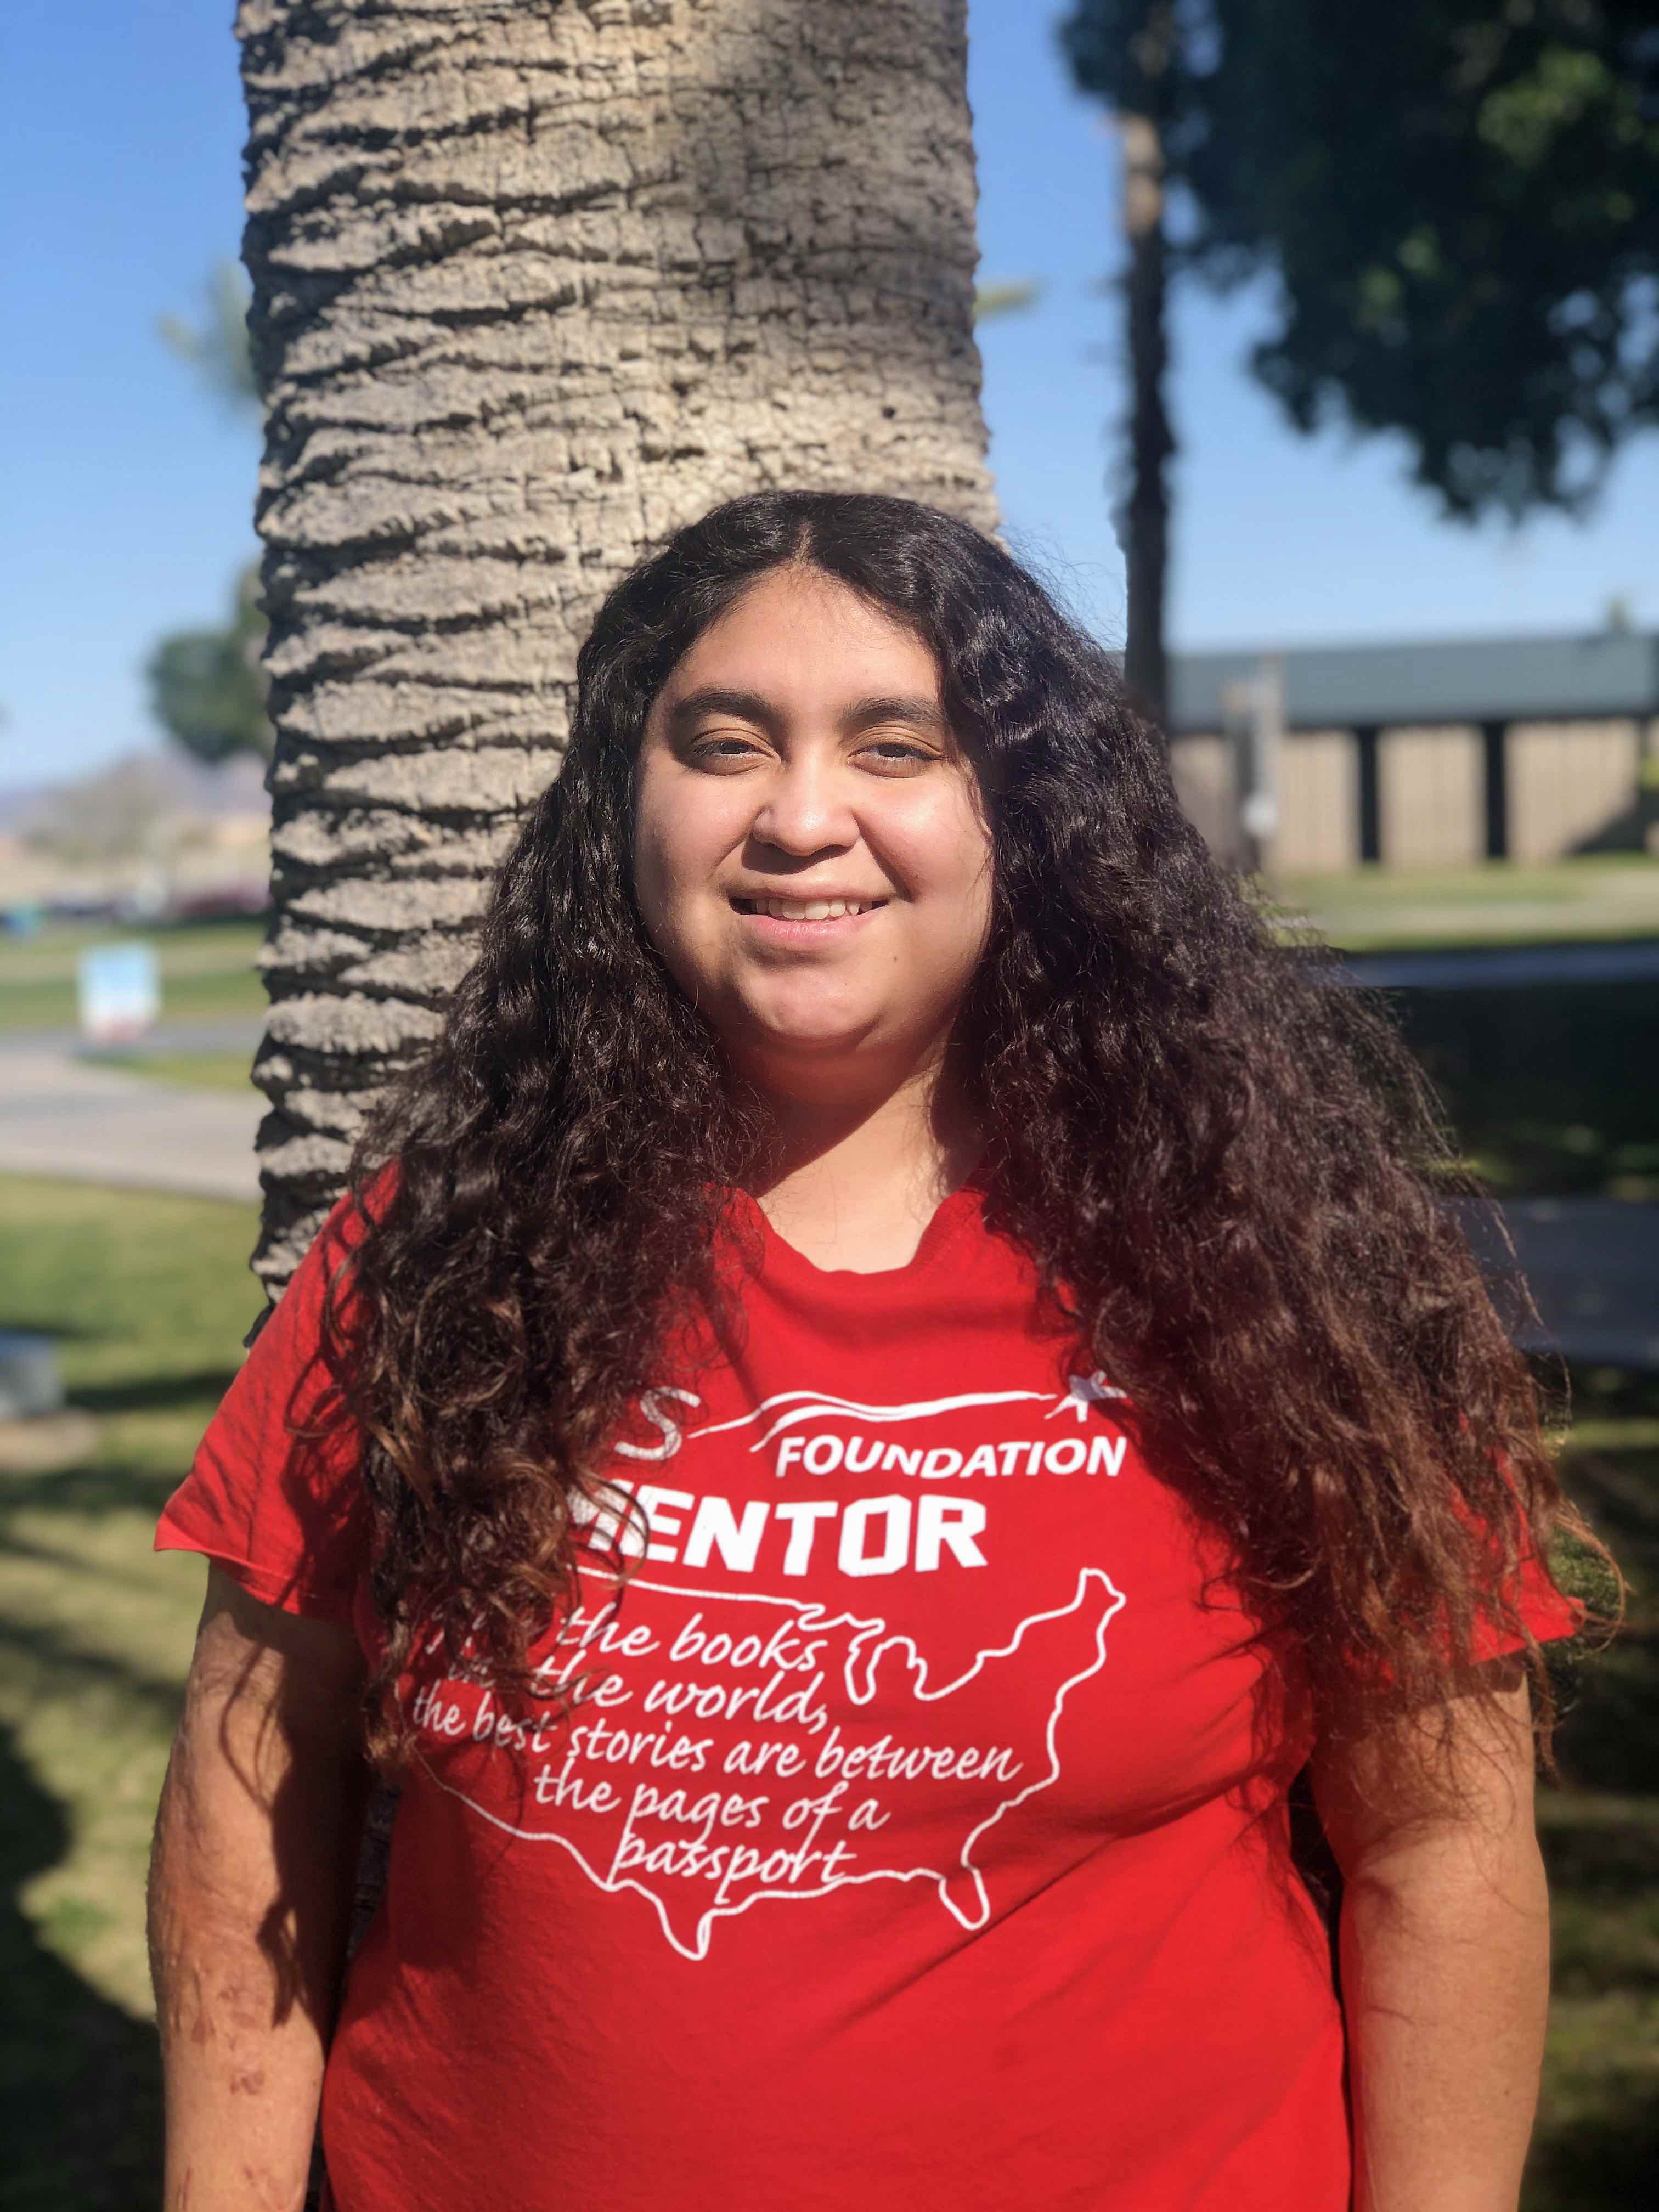 A girl with long black curly hair is wearing a red shirt that says "Foundation Mentor" and is smiling in front of a palm tree.